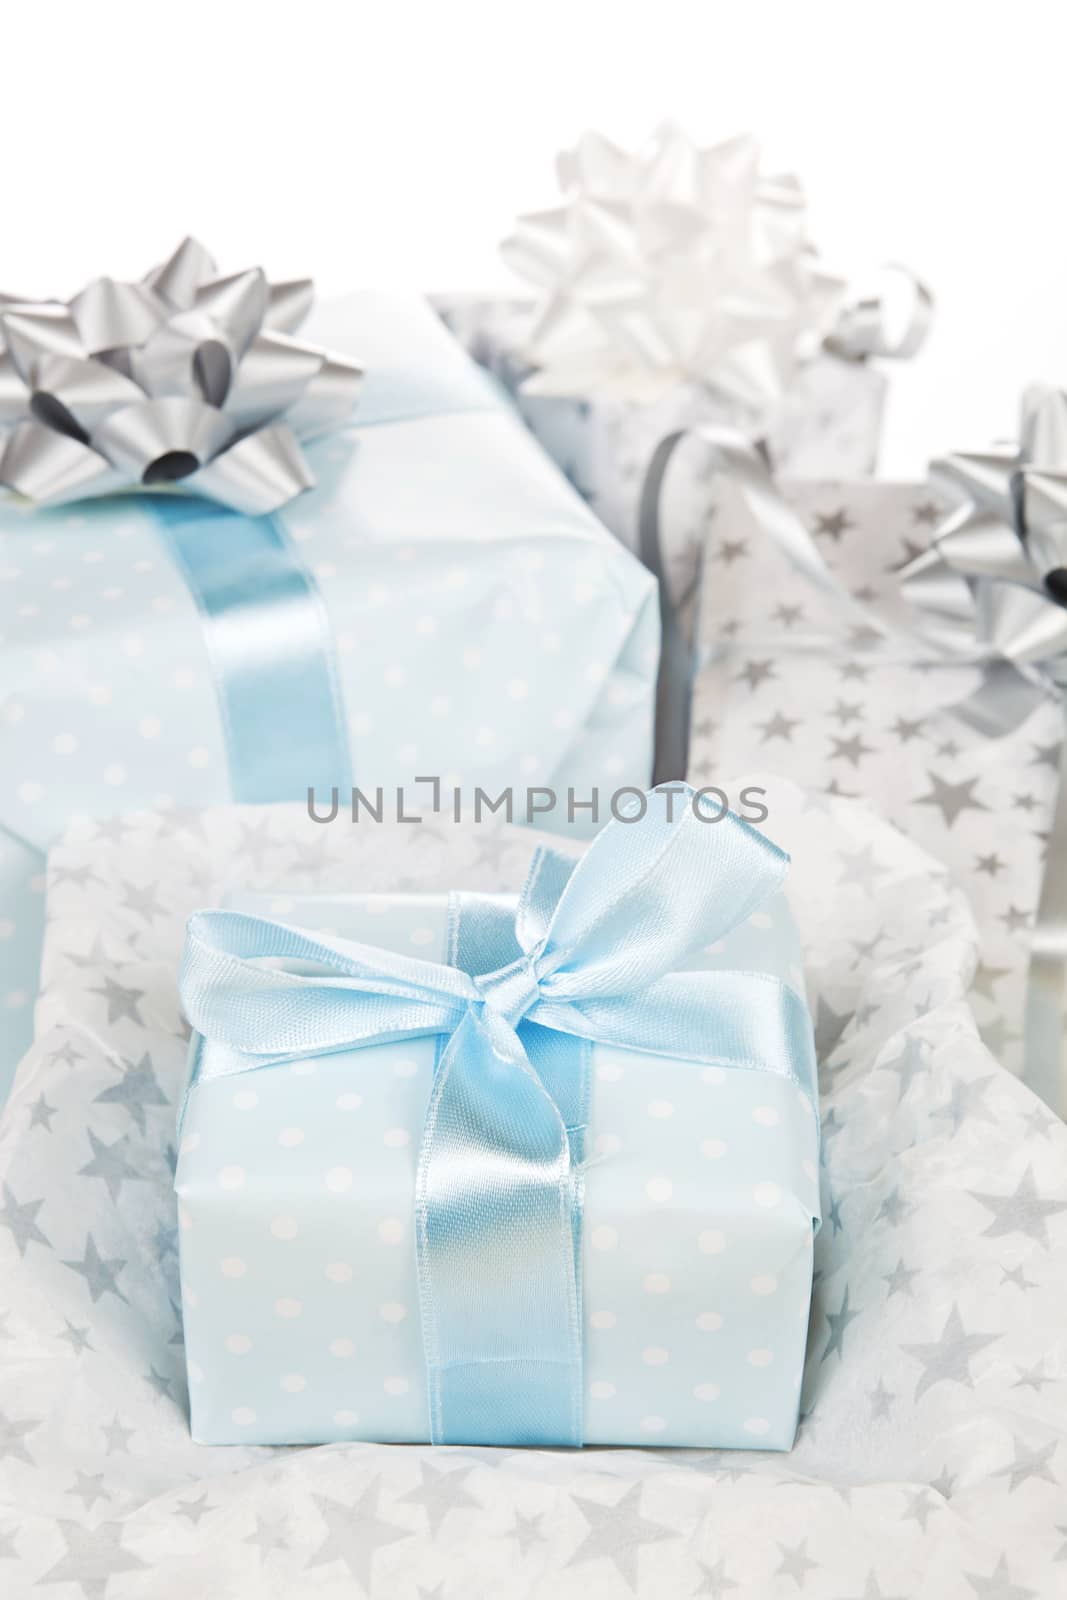 Luxurious gift box set. by eskymaks